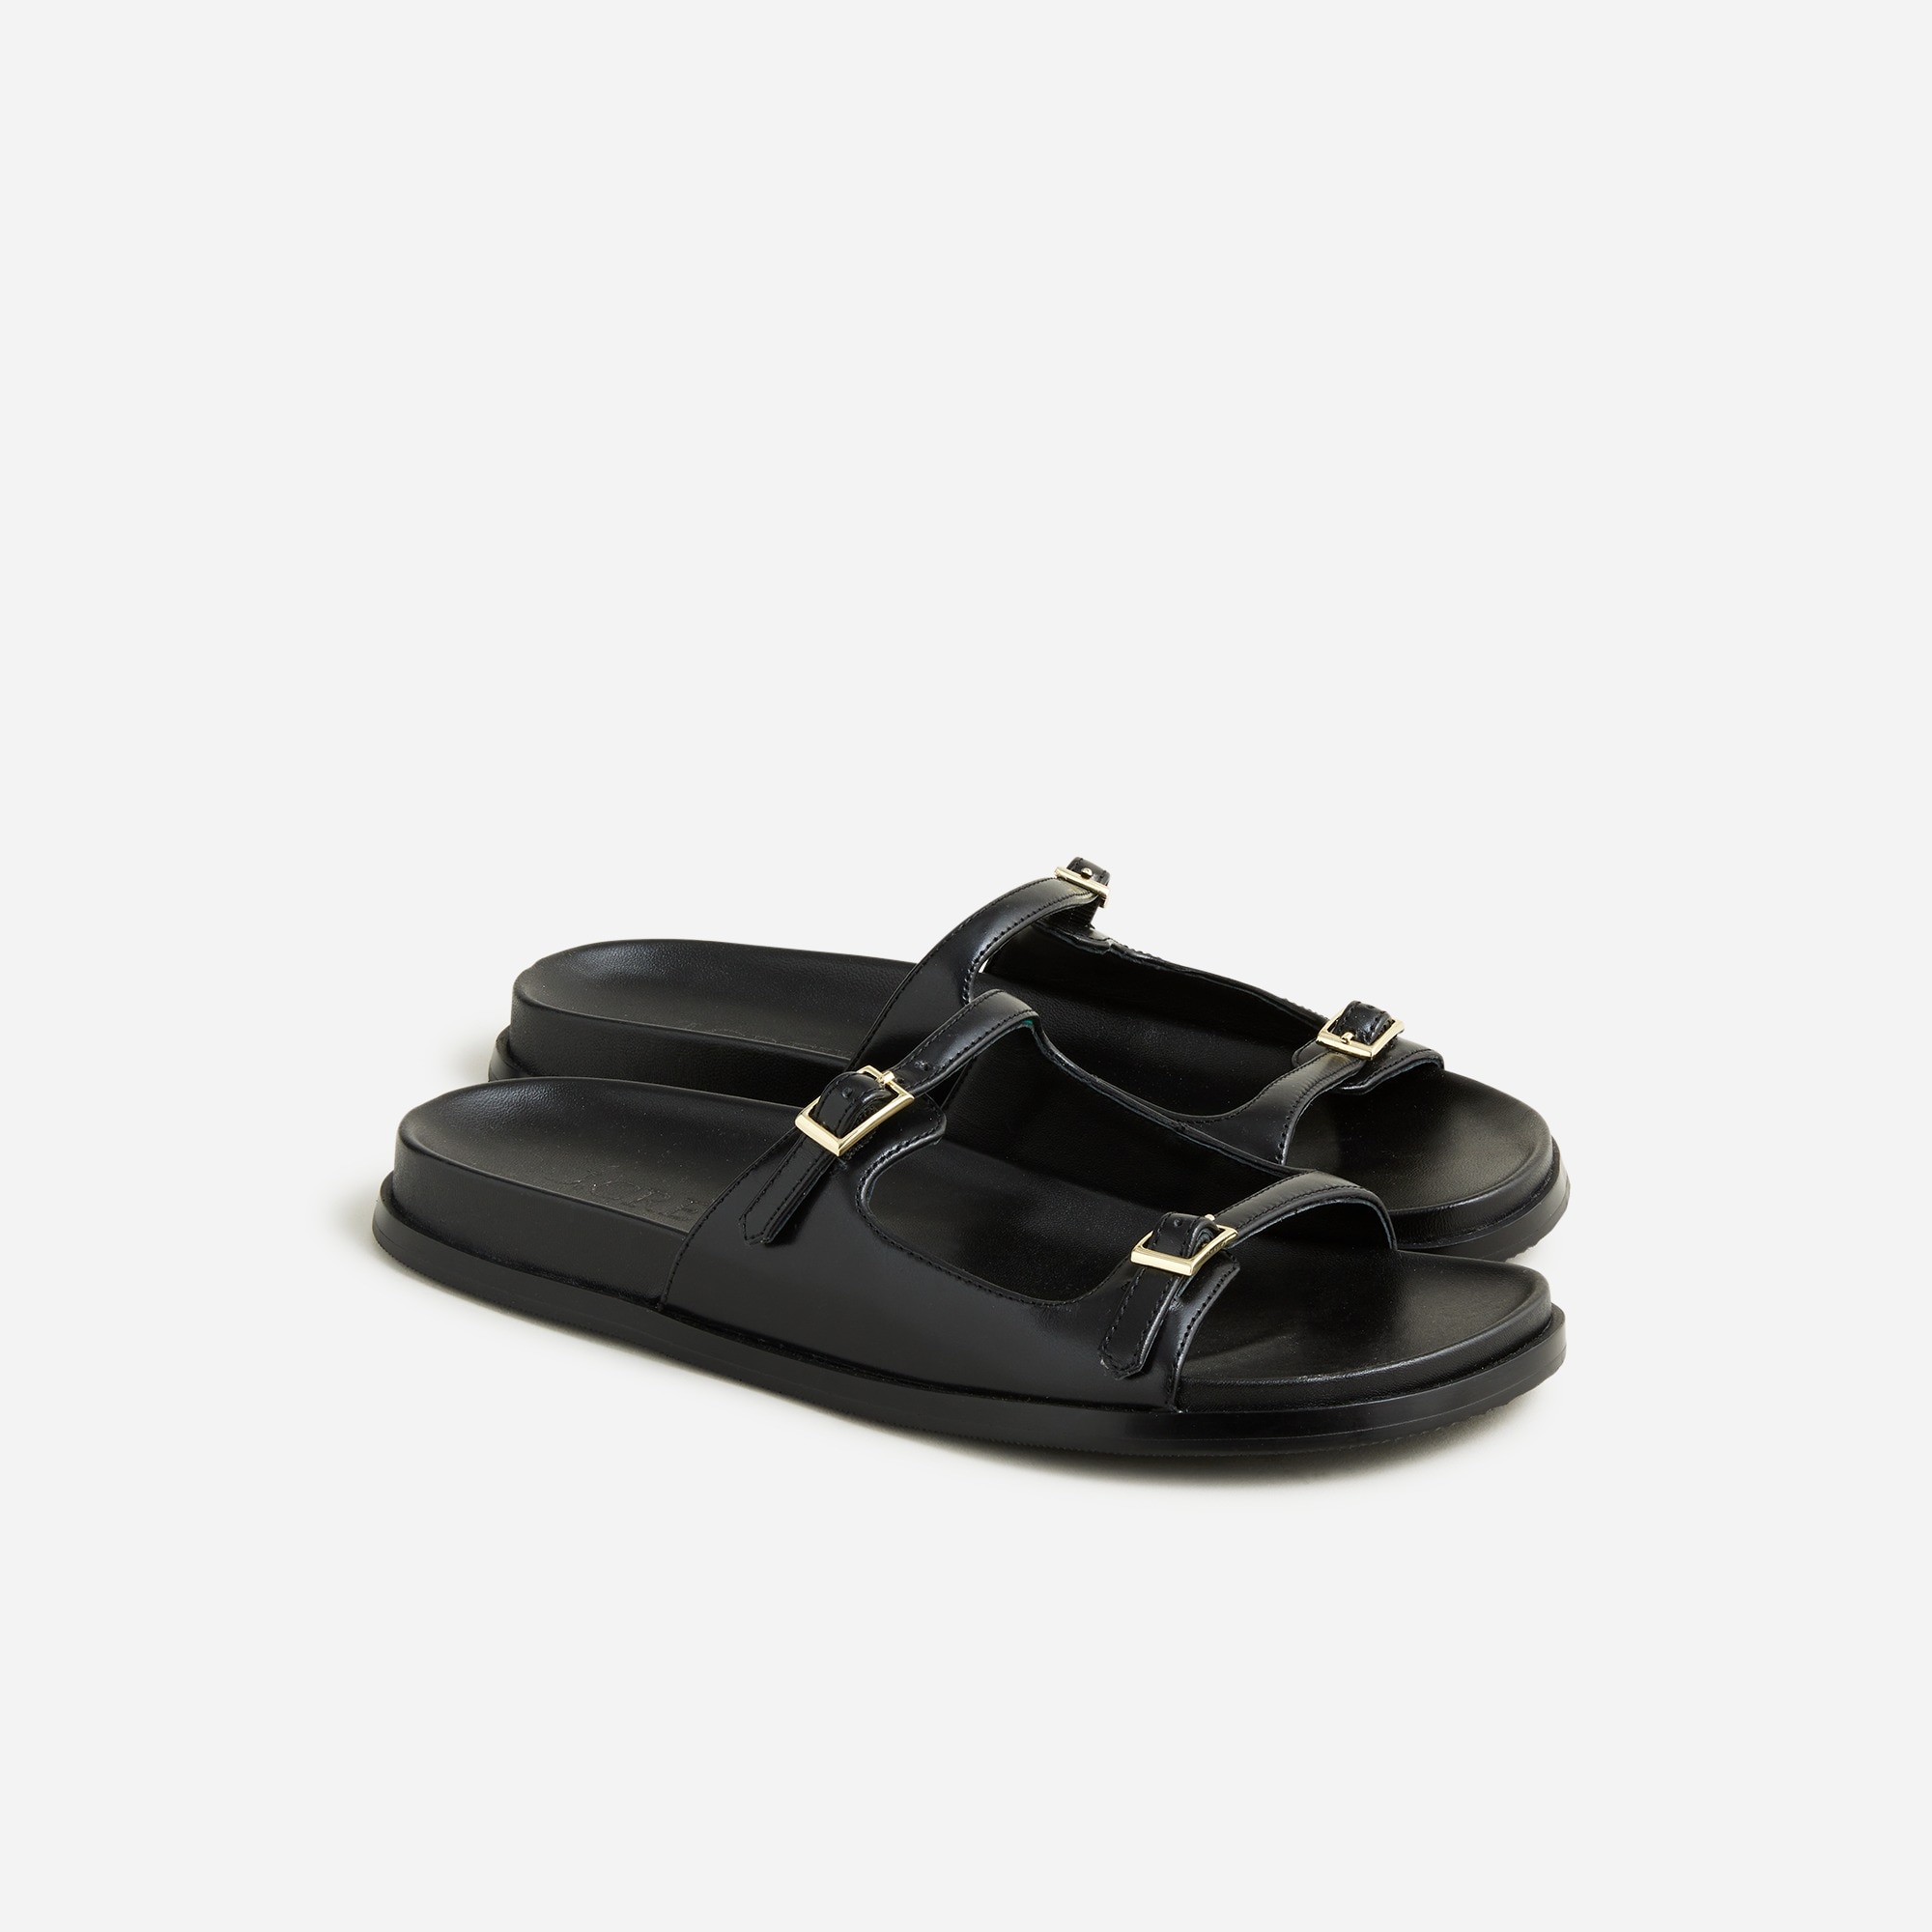  Colbie buckle sandals in leather